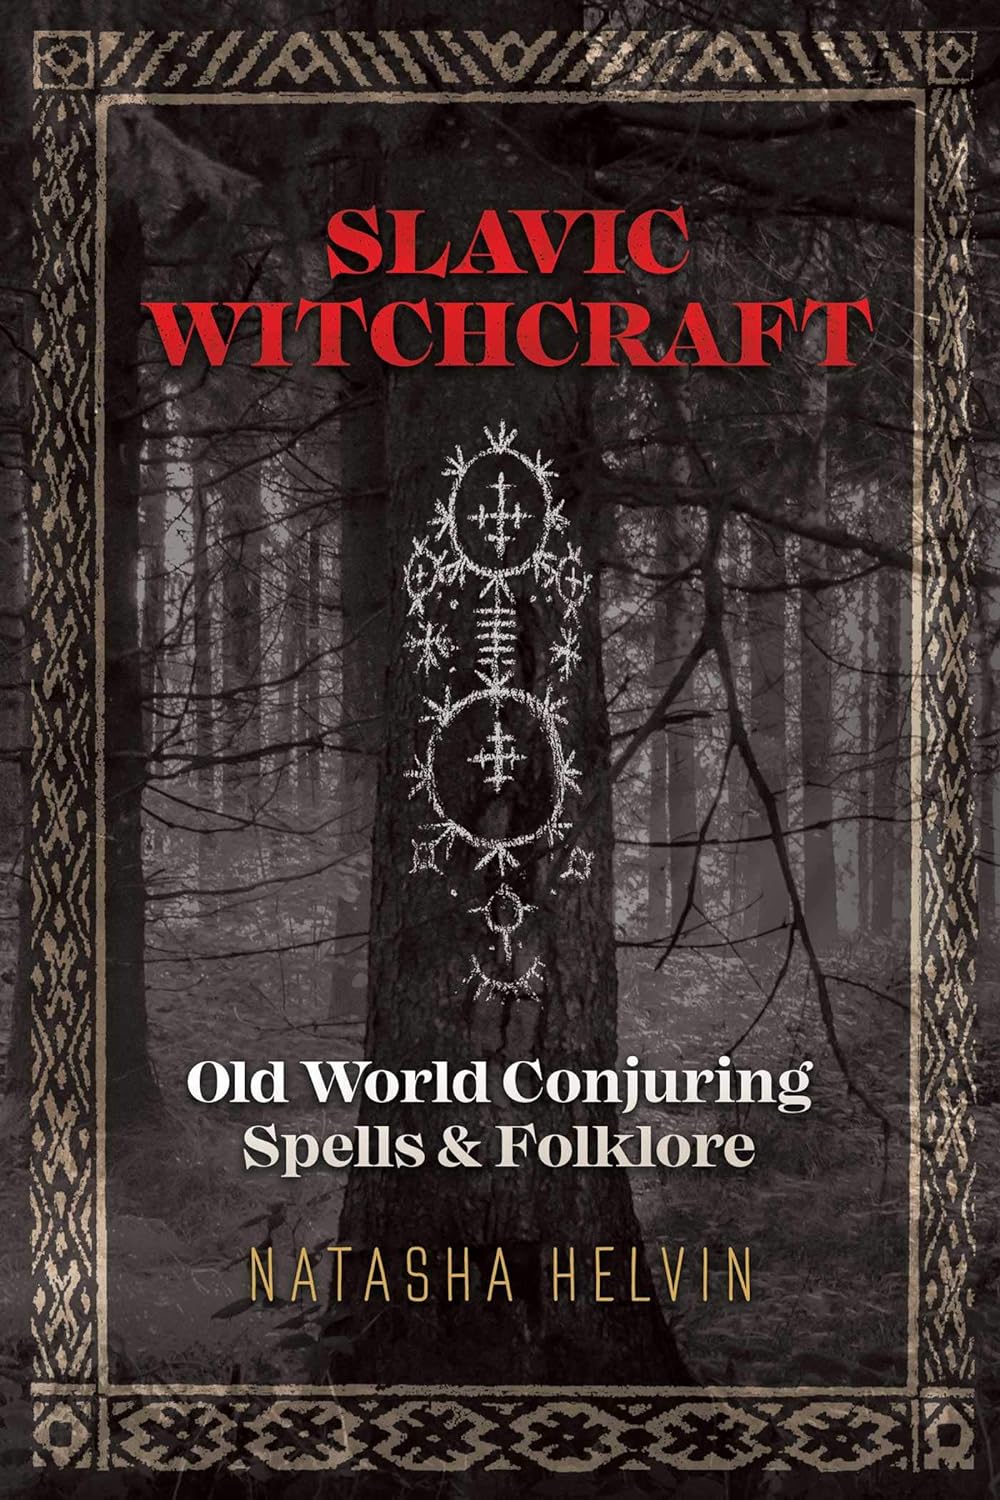 Slavic Witchcraft - Old World Conjuring Spells and Folklore